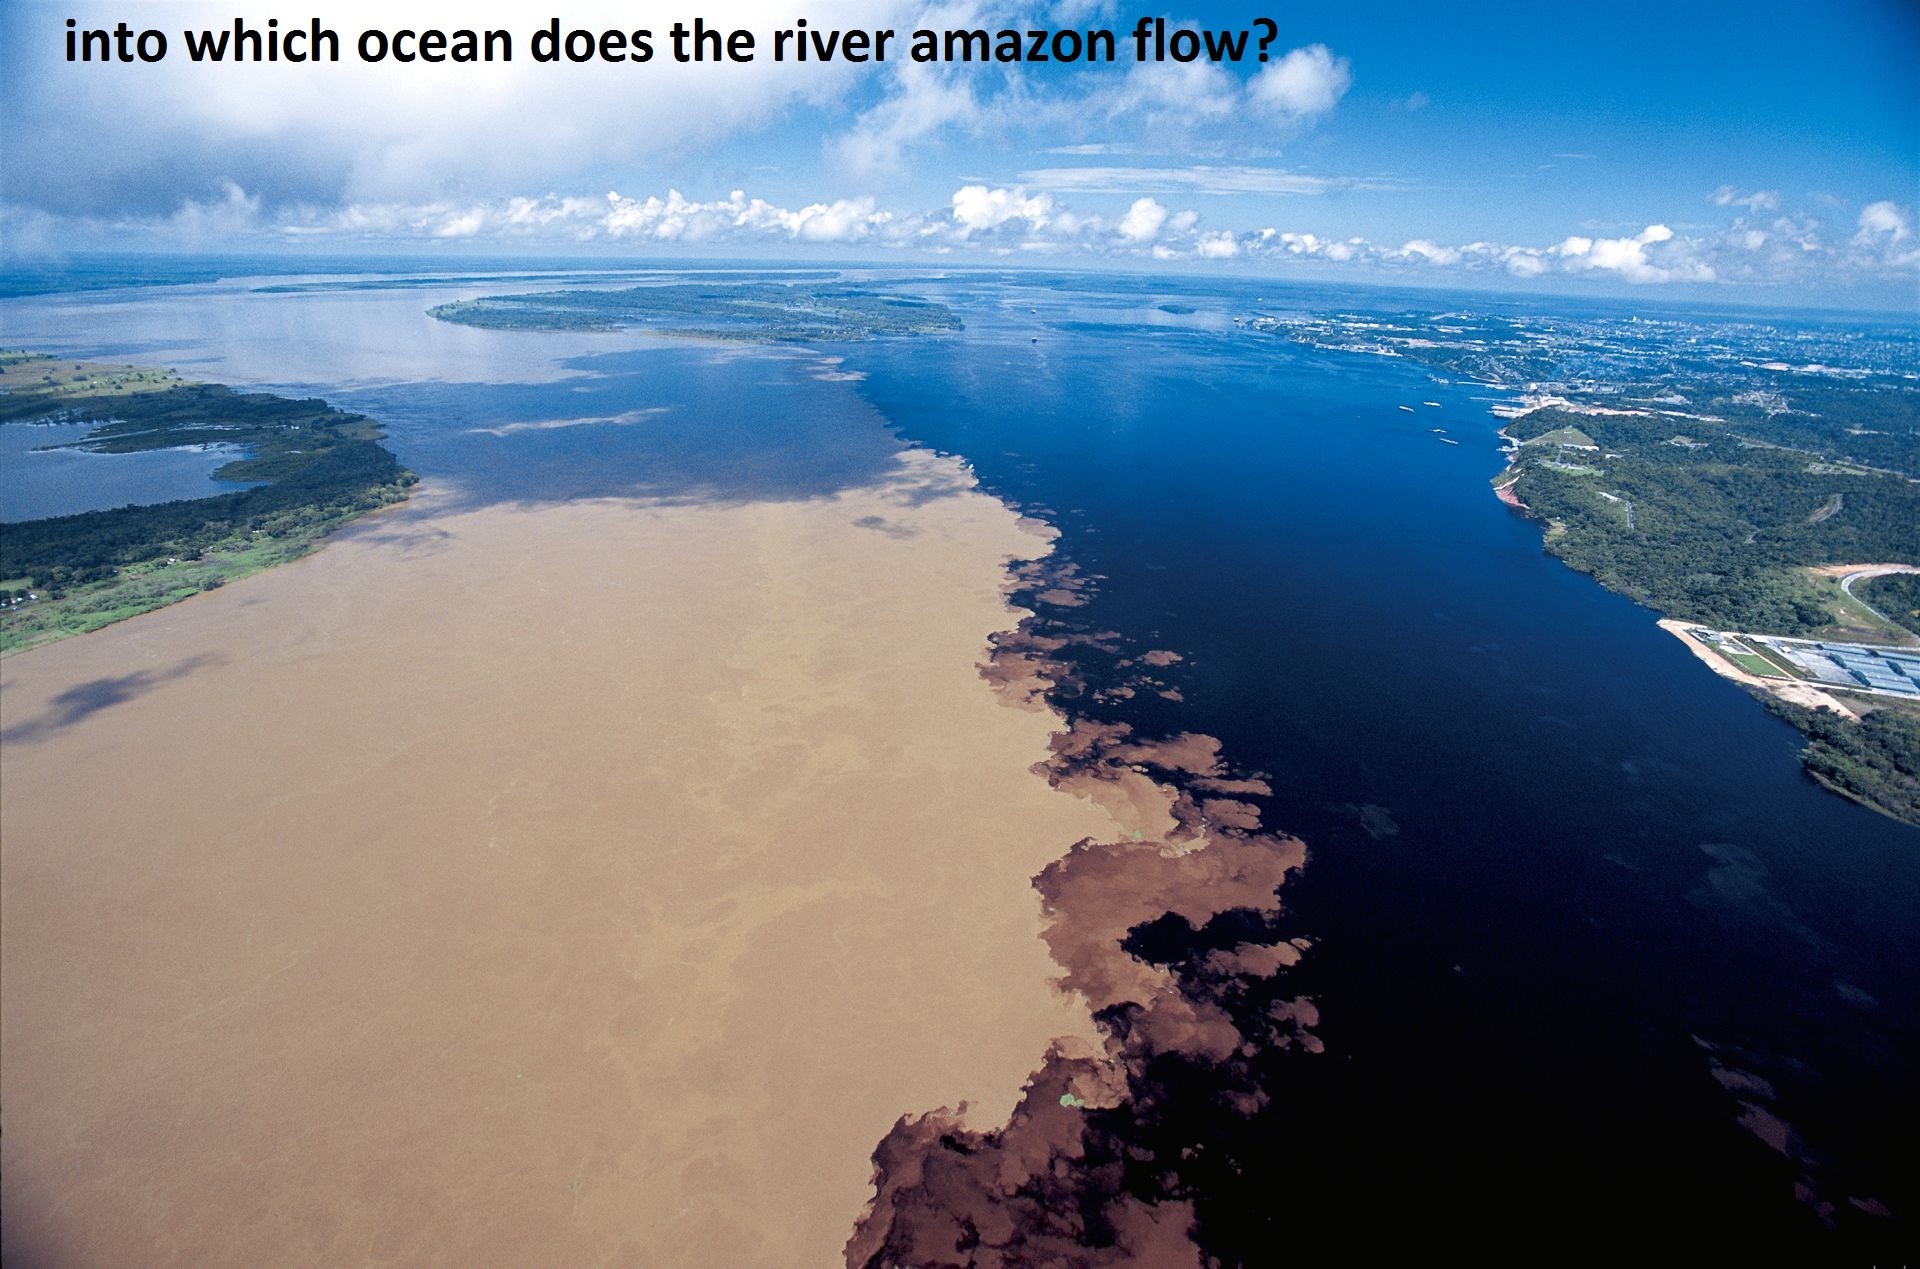 into which ocean does the river amazon flow?